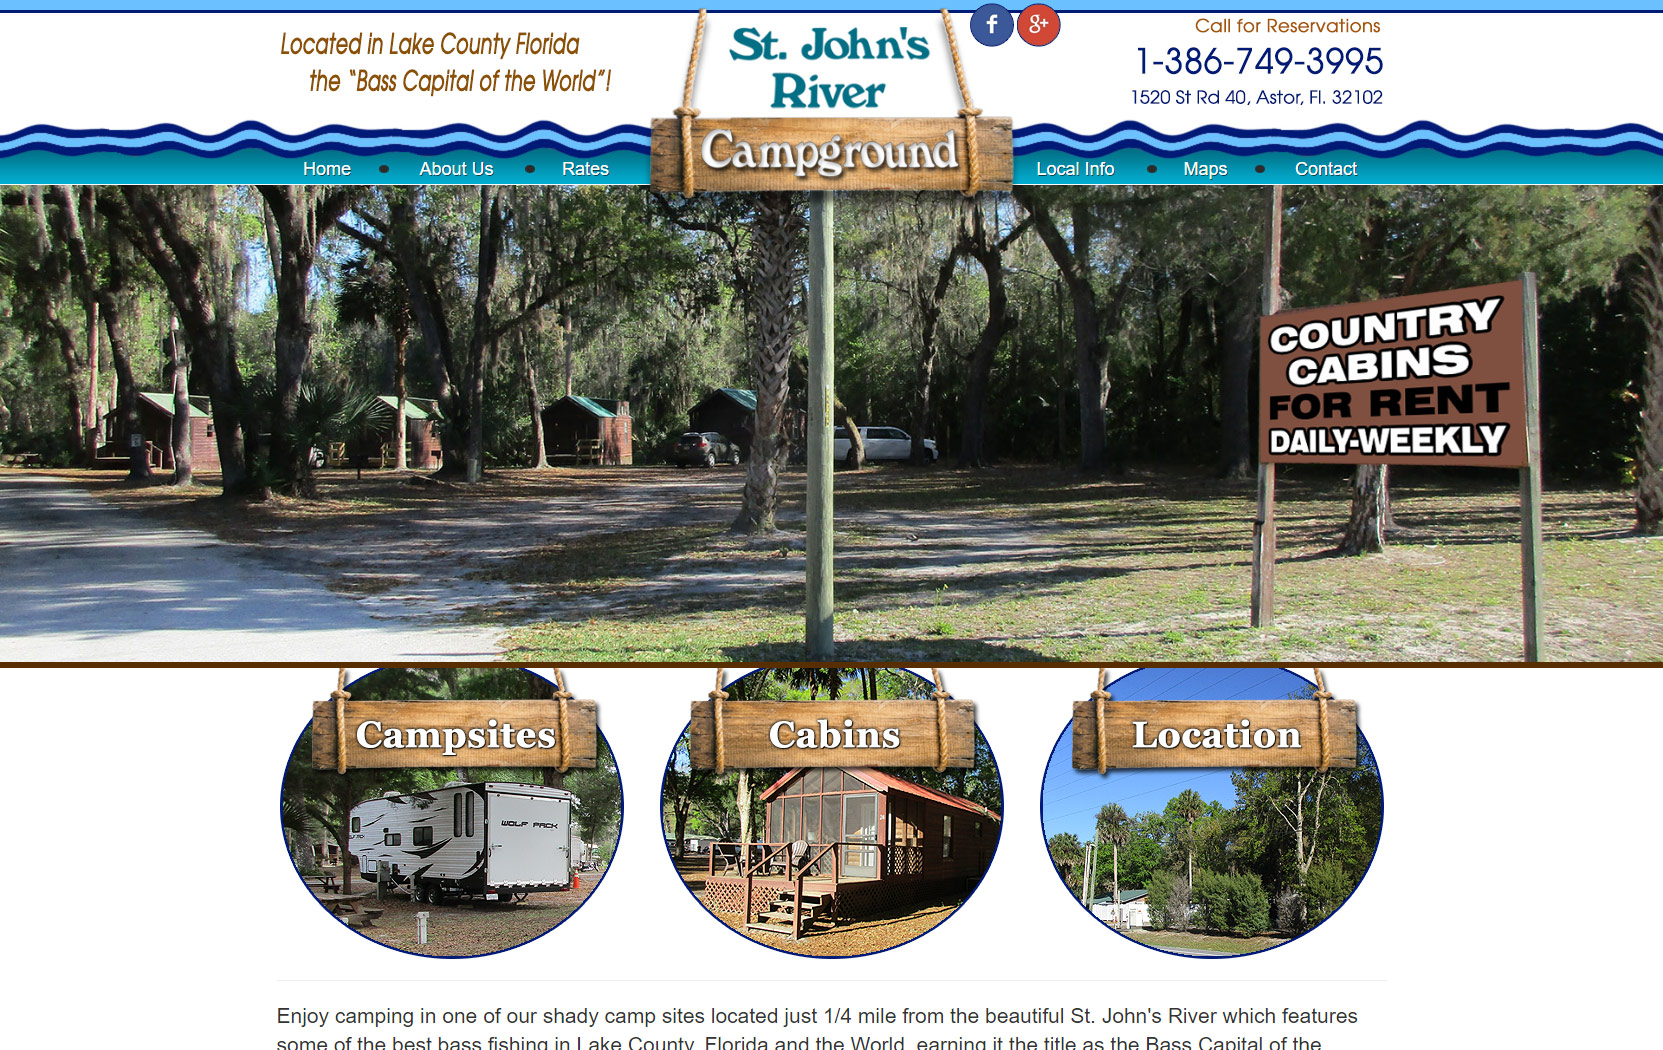 St. Johns River Campground